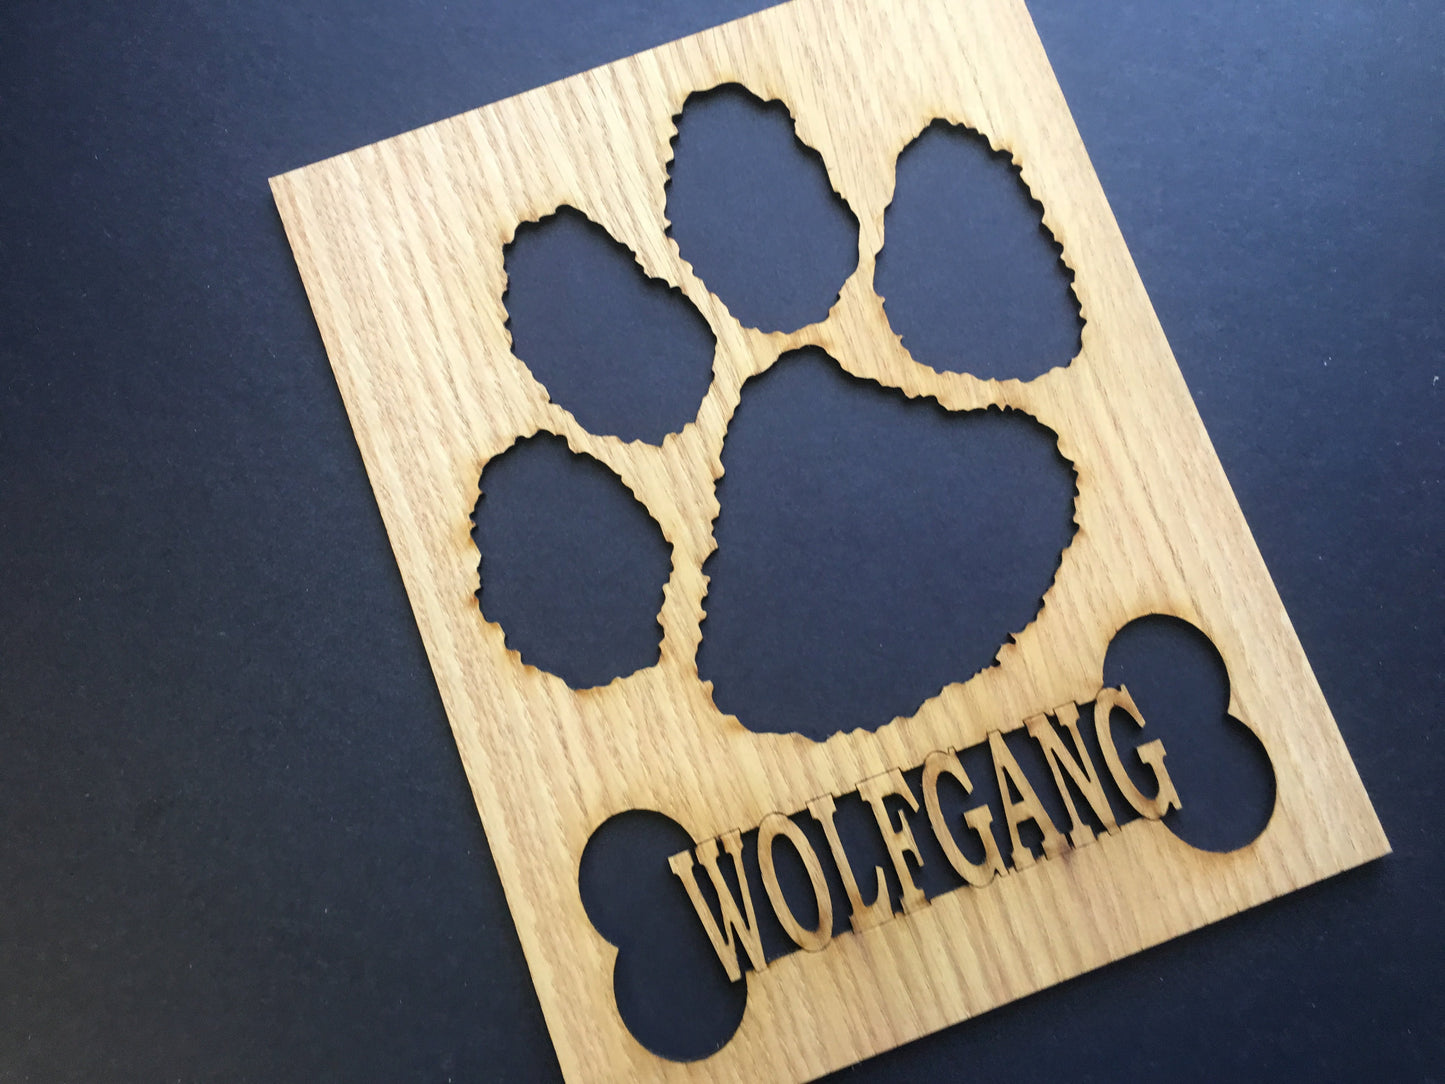 Dog Paw Print Picture Frame